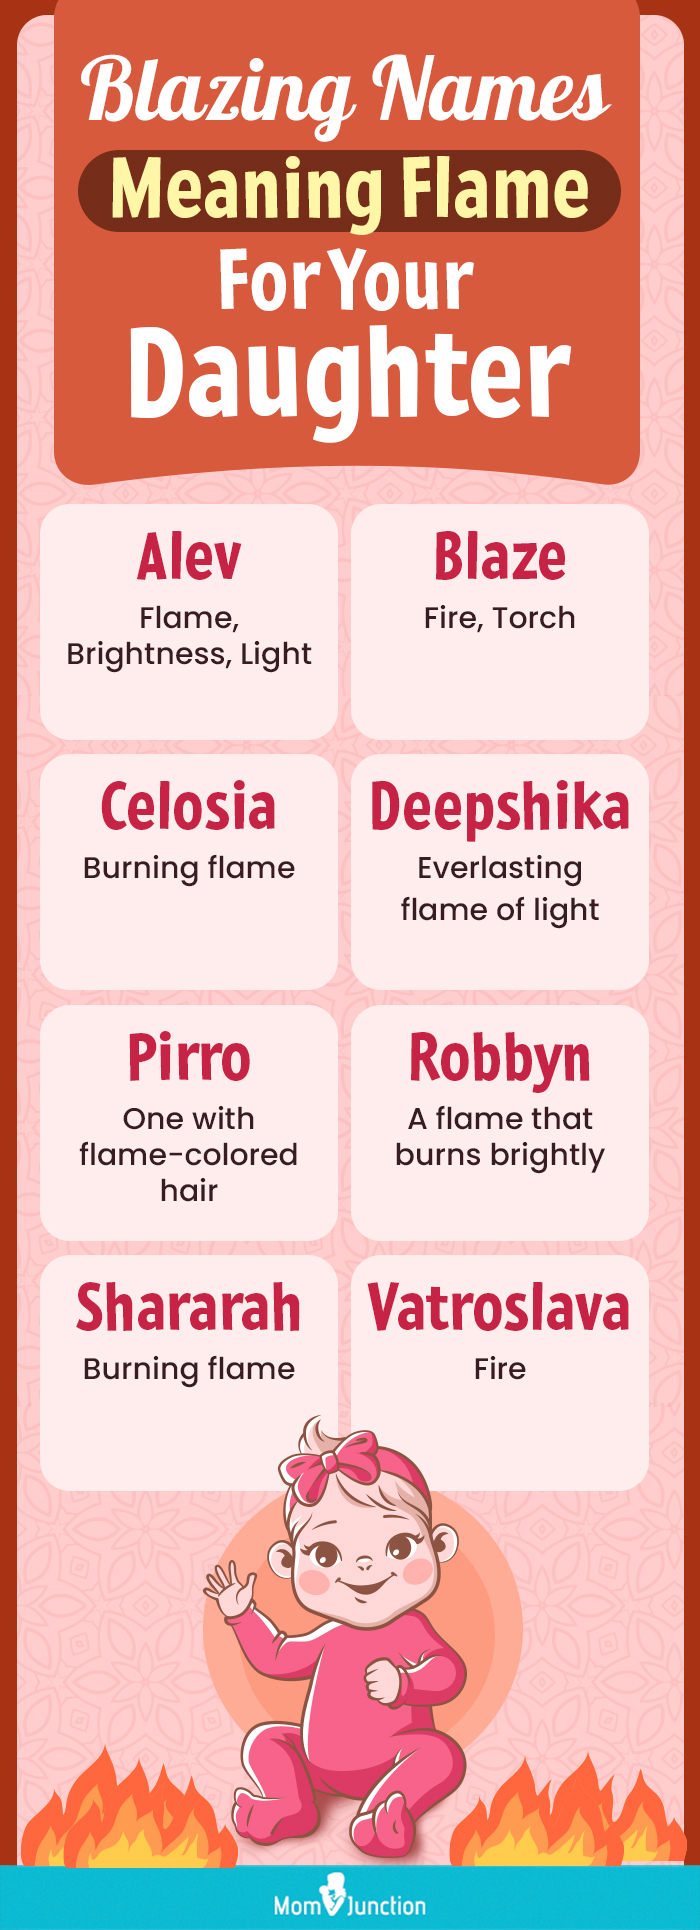 Blazing Names Meaning Flame For Your Daughter (infographic)